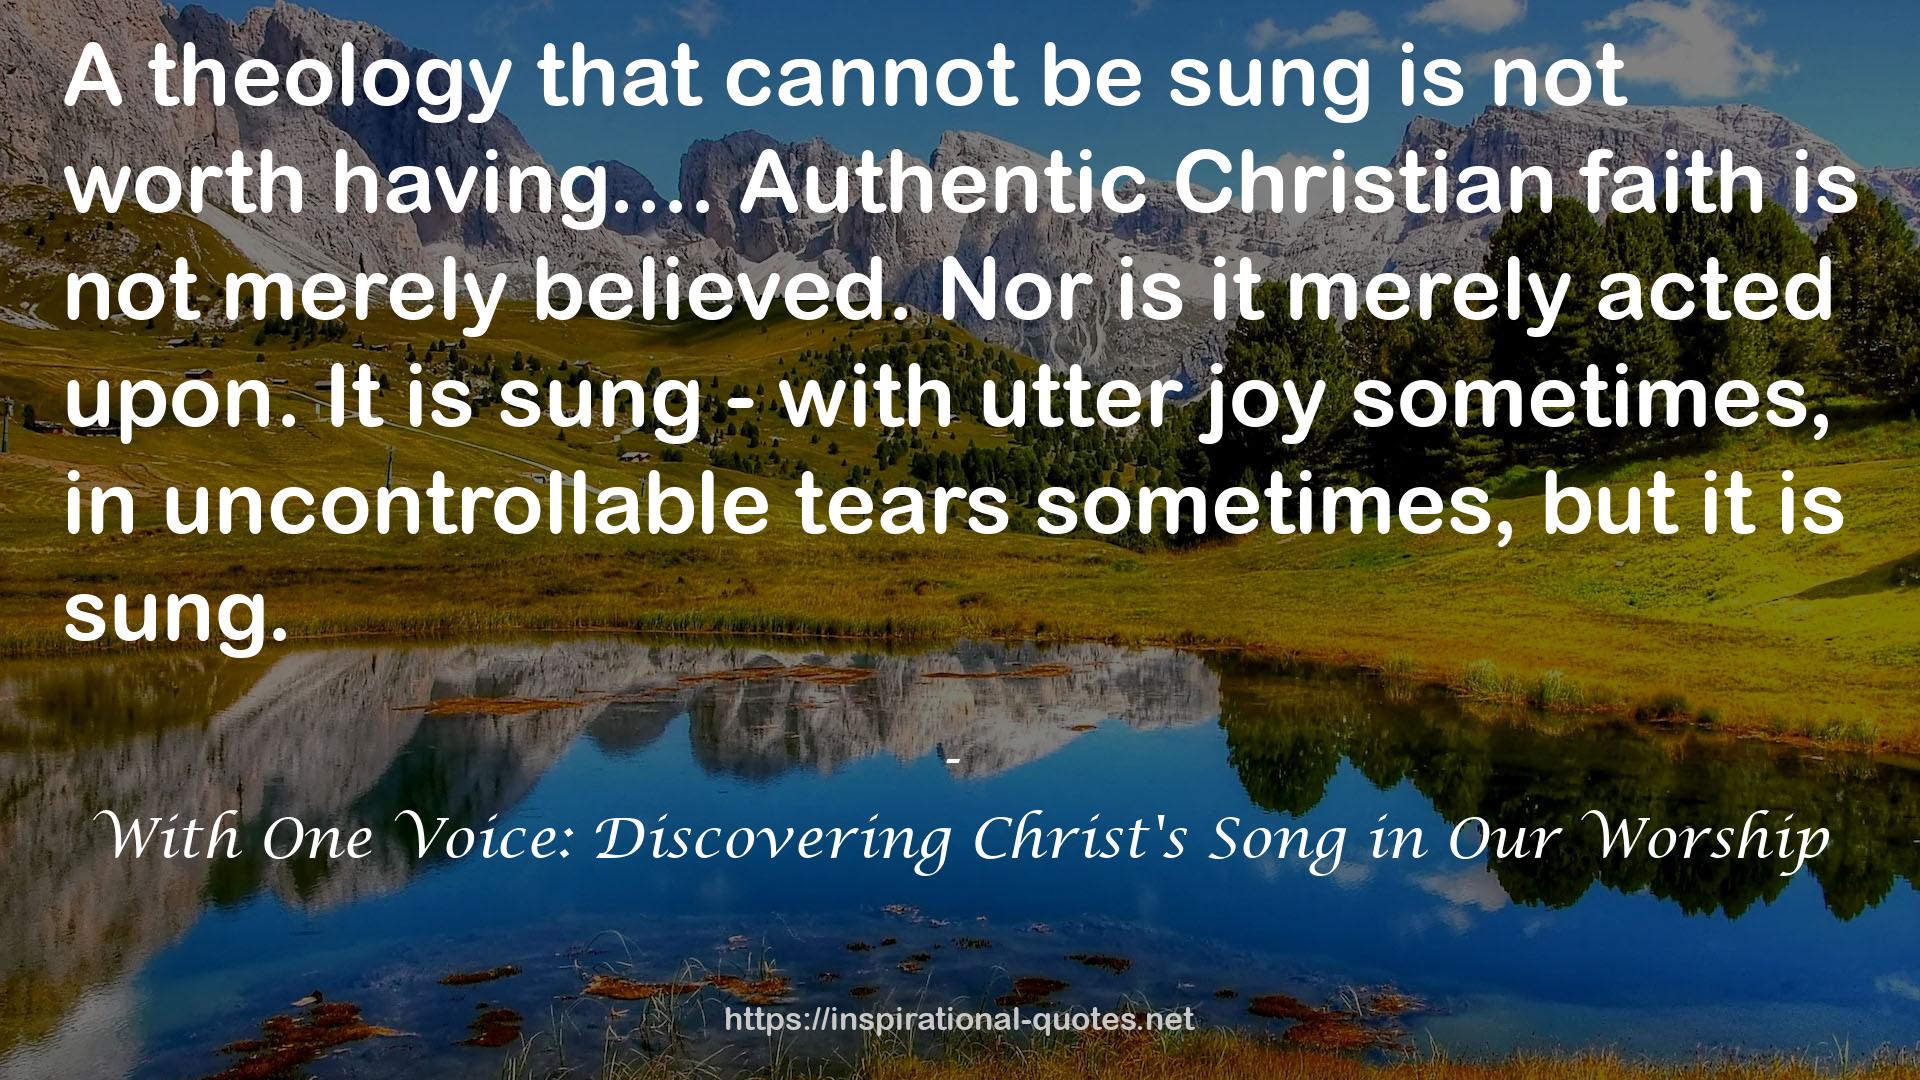 With One Voice: Discovering Christ's Song in Our Worship QUOTES